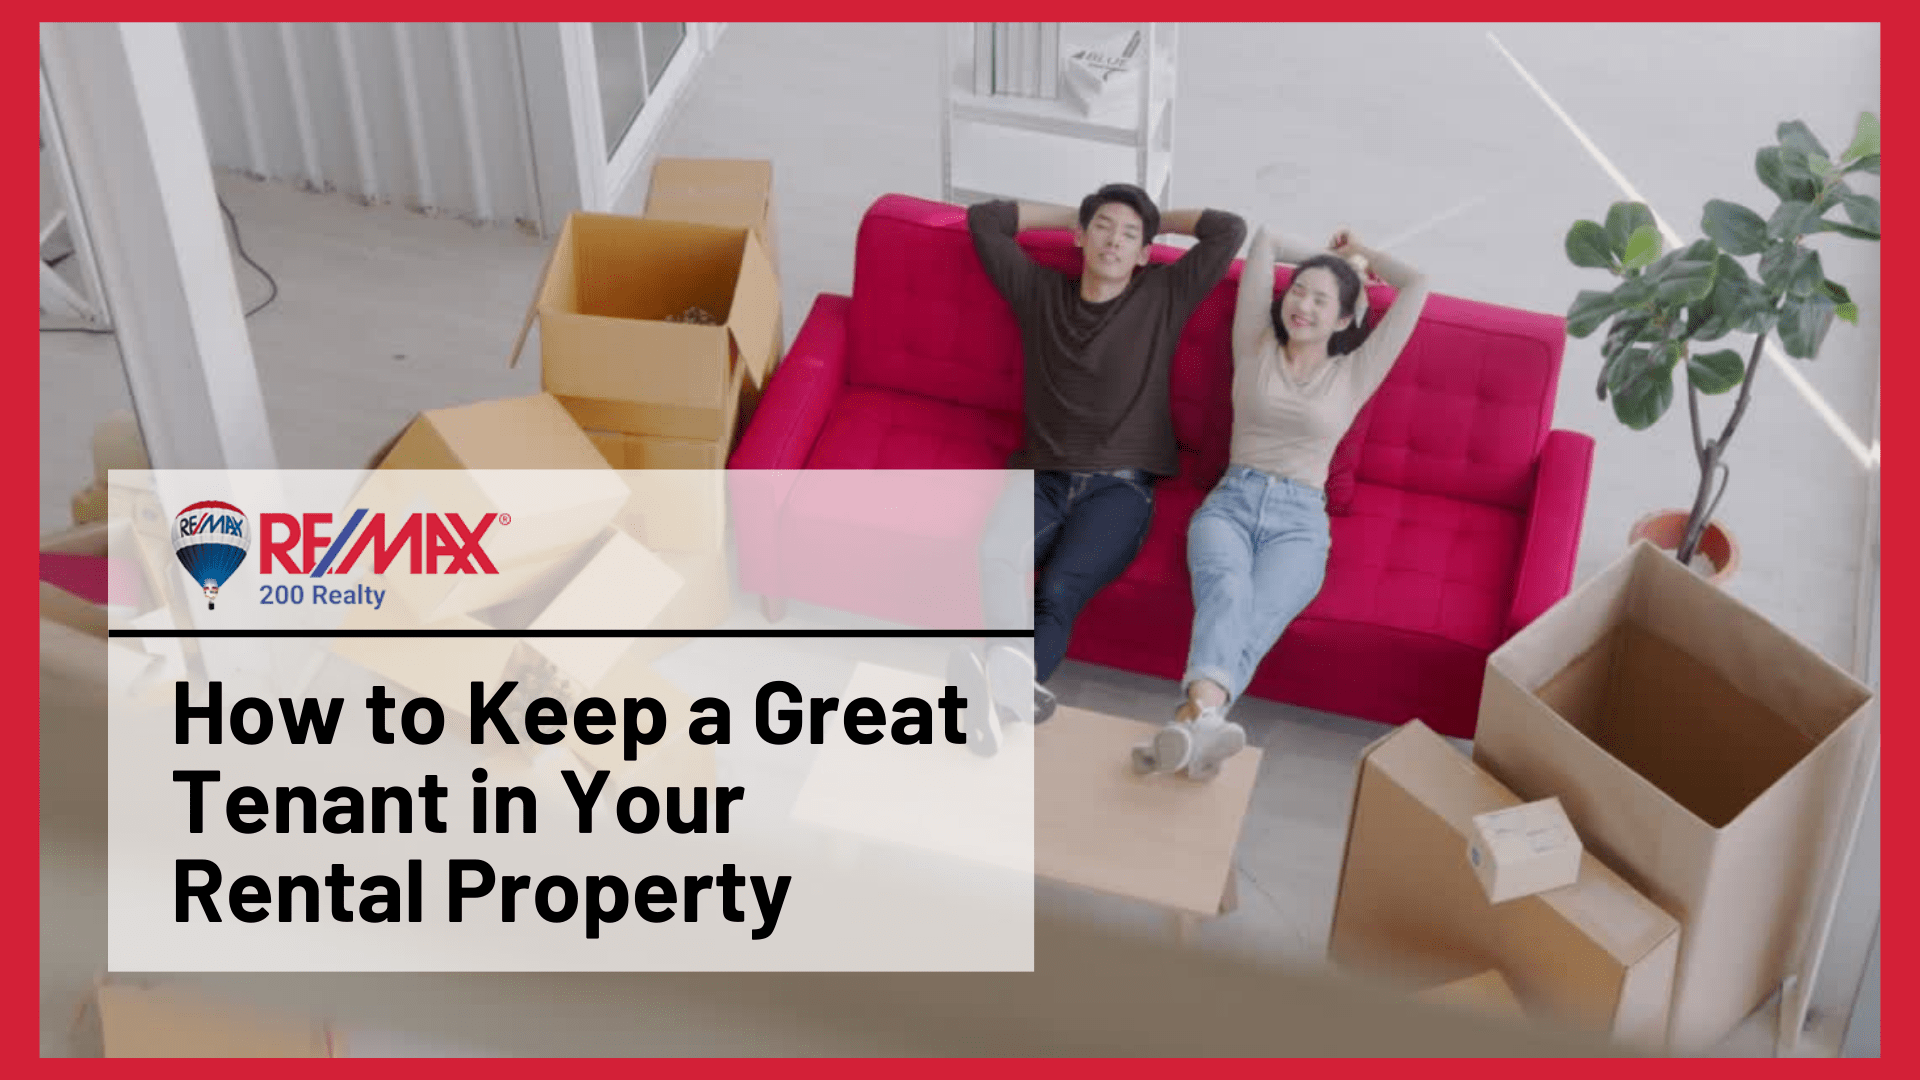 How to Keep a Great Tenant in Your Rental Property